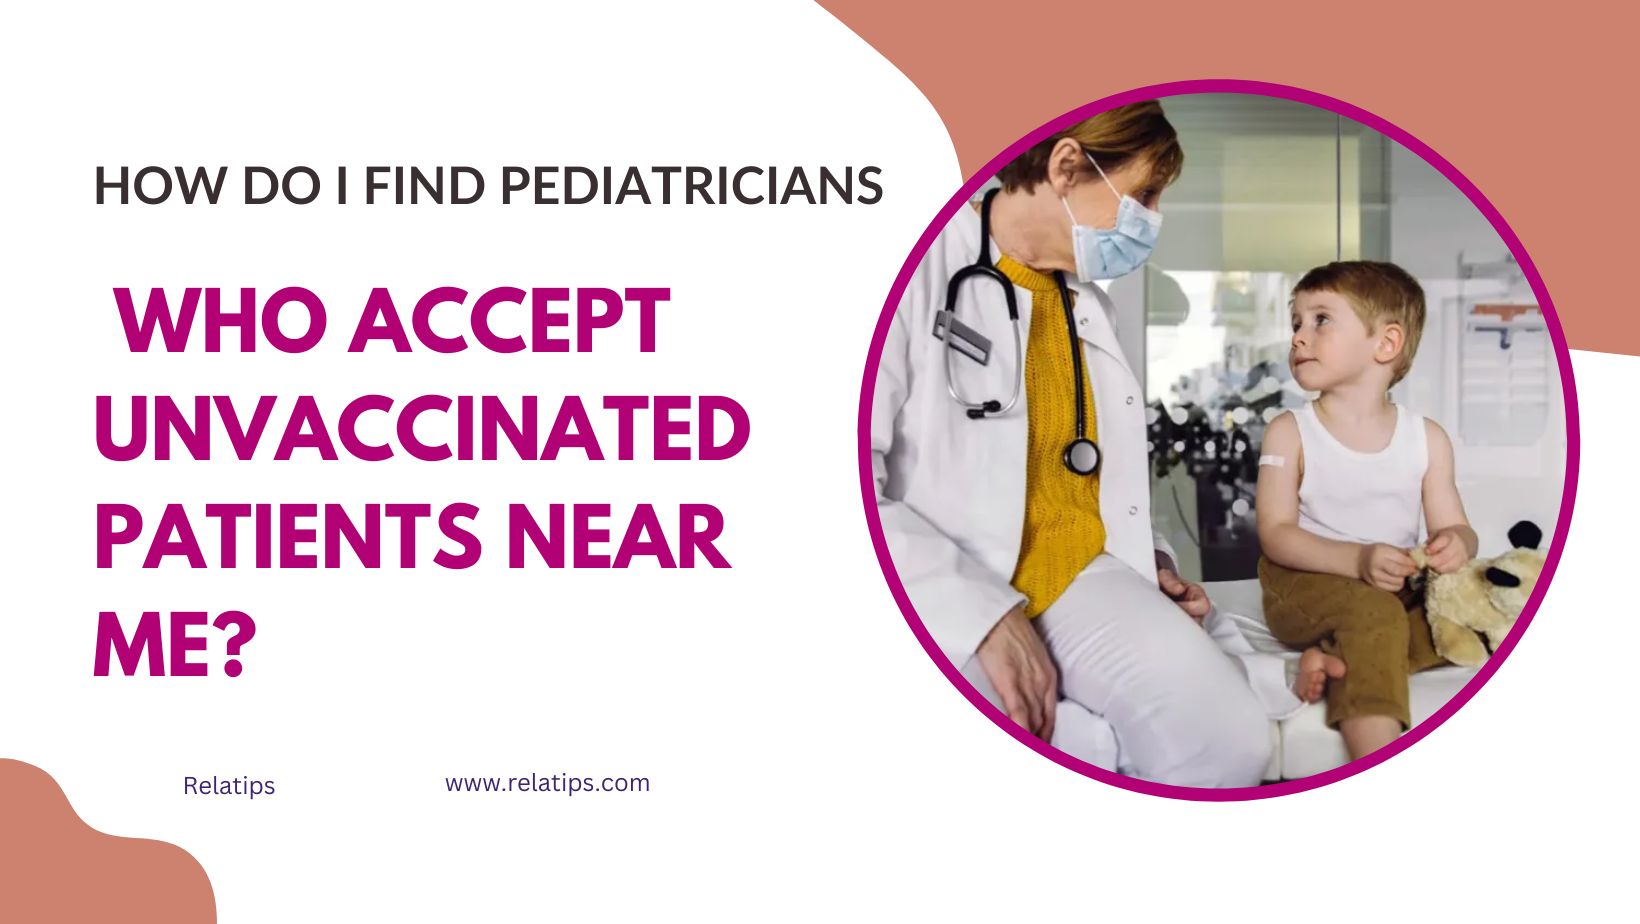 How Do I Find Pediatricians Who Accept Unvaccinated Patients Near Me?